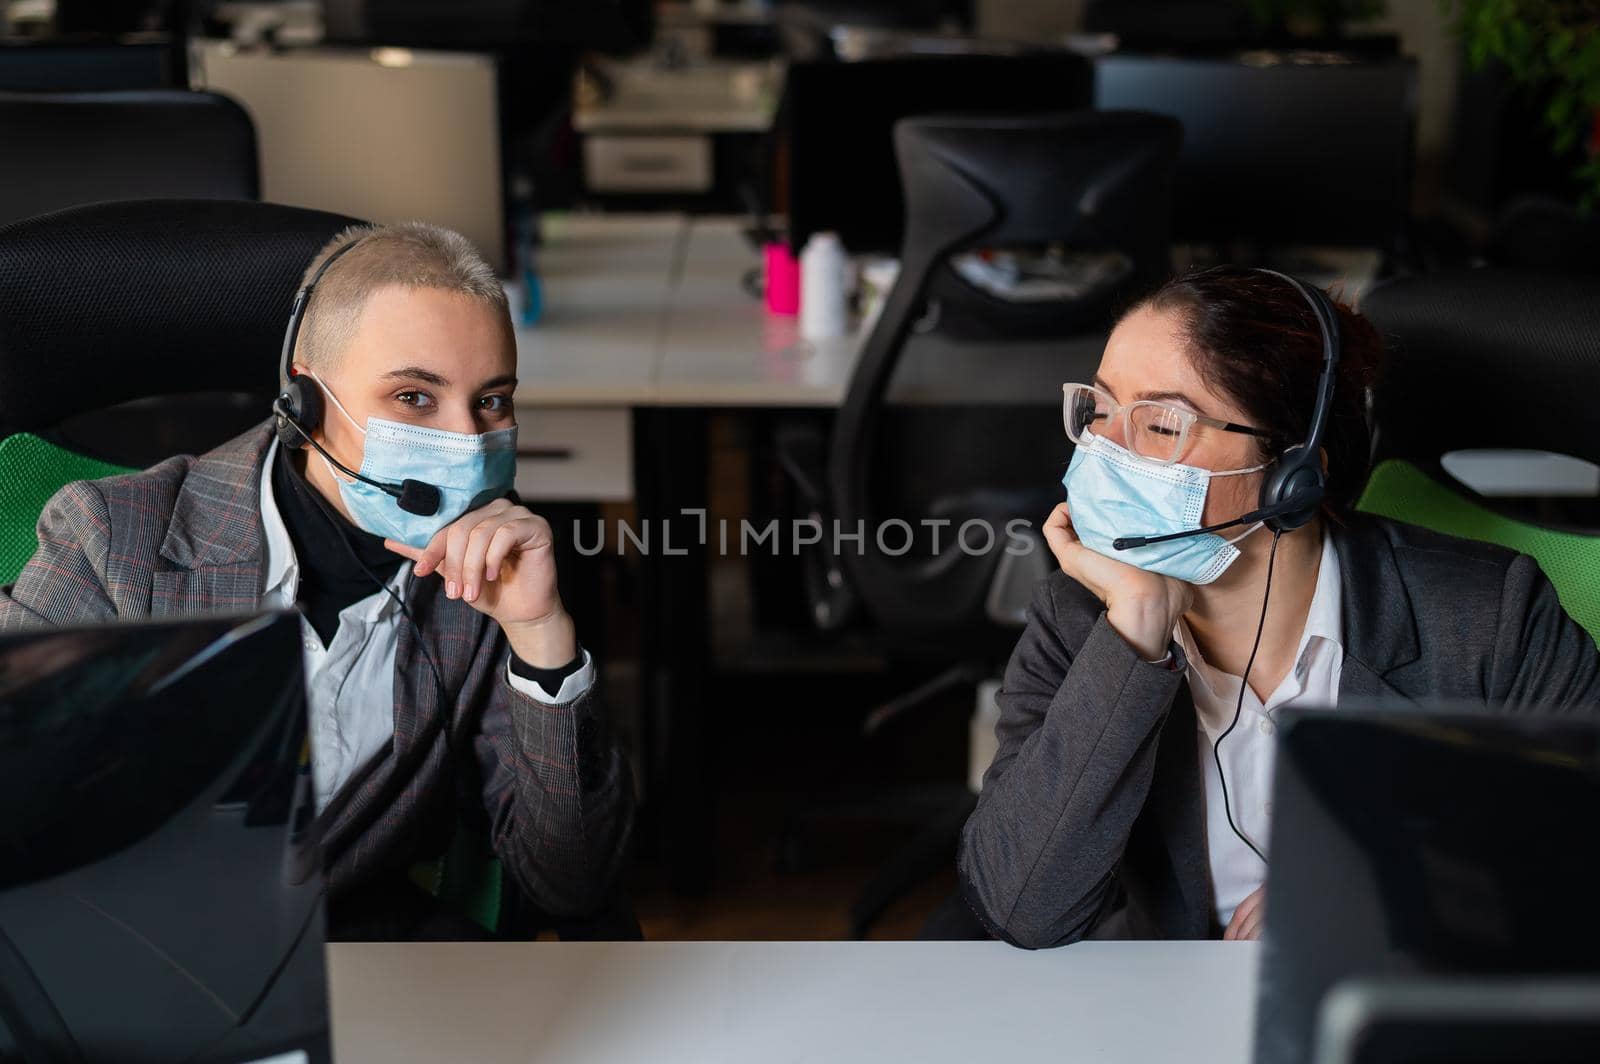 Two women in medical masks and headsets are working in the office.